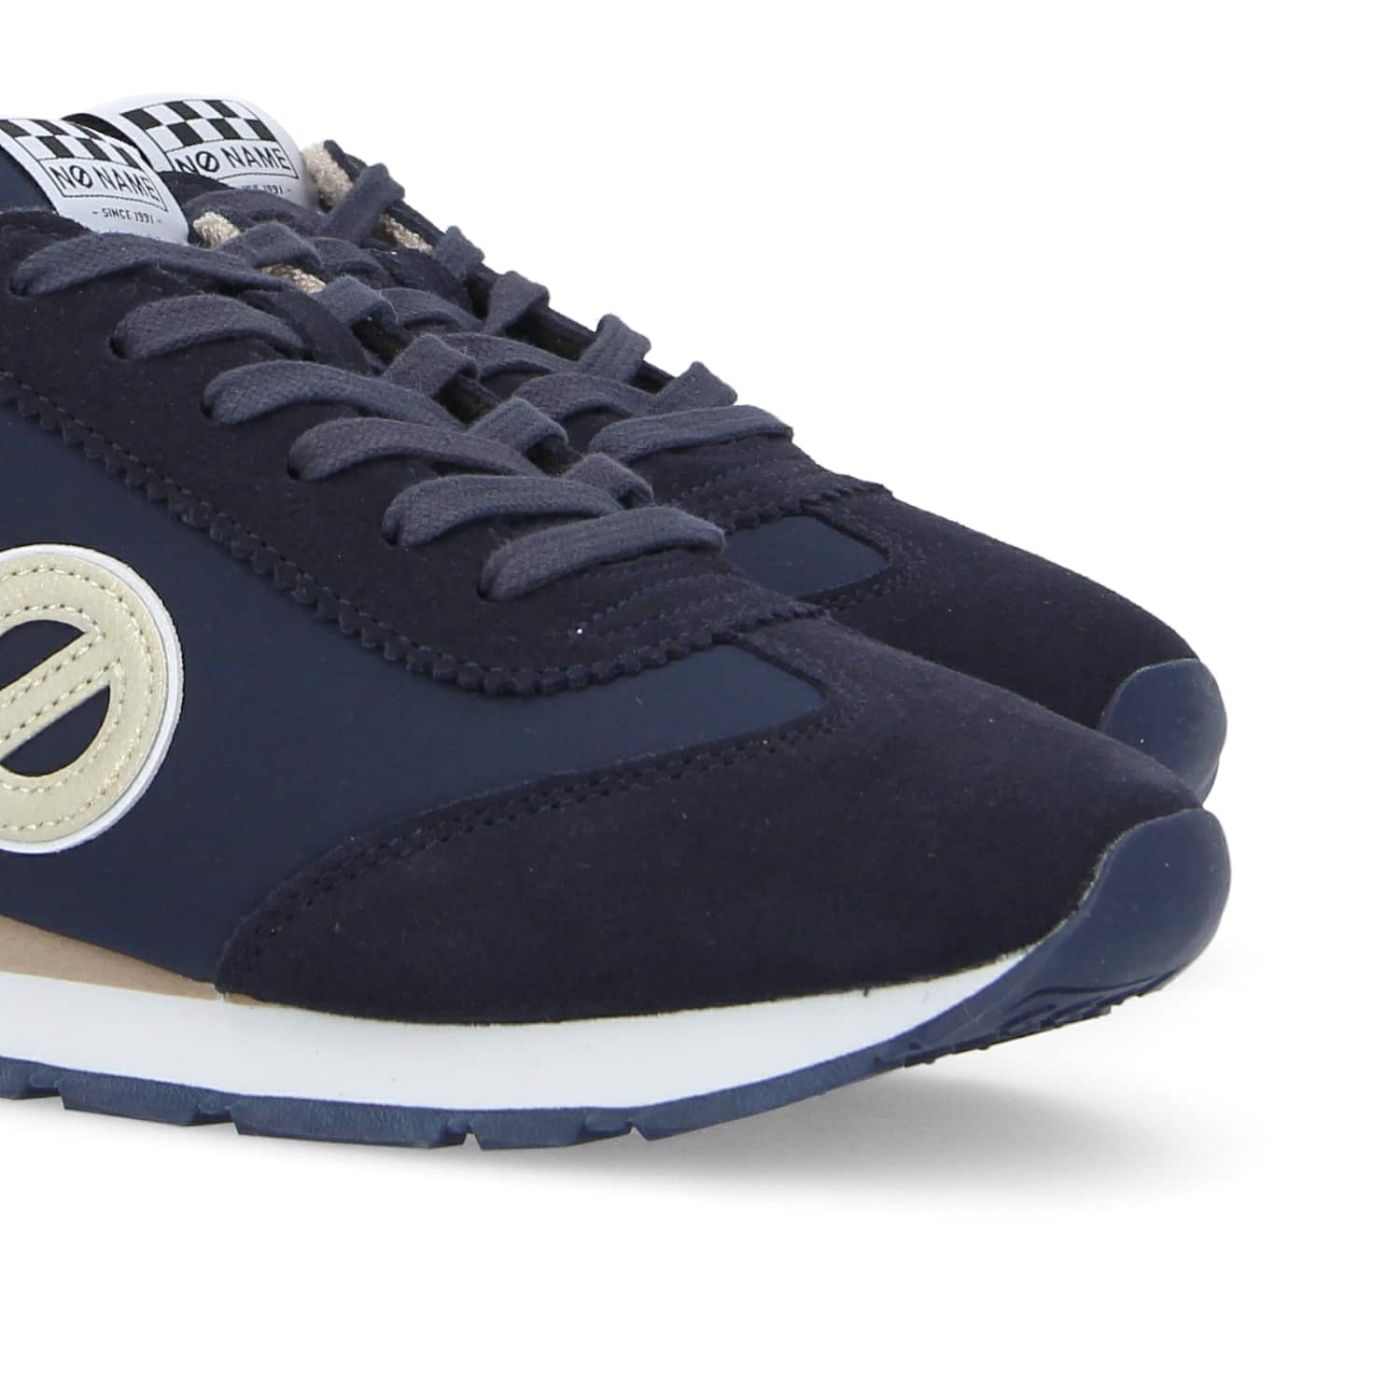 CITY RUN JOGGER - SUEDE/SQUARE - NAVY